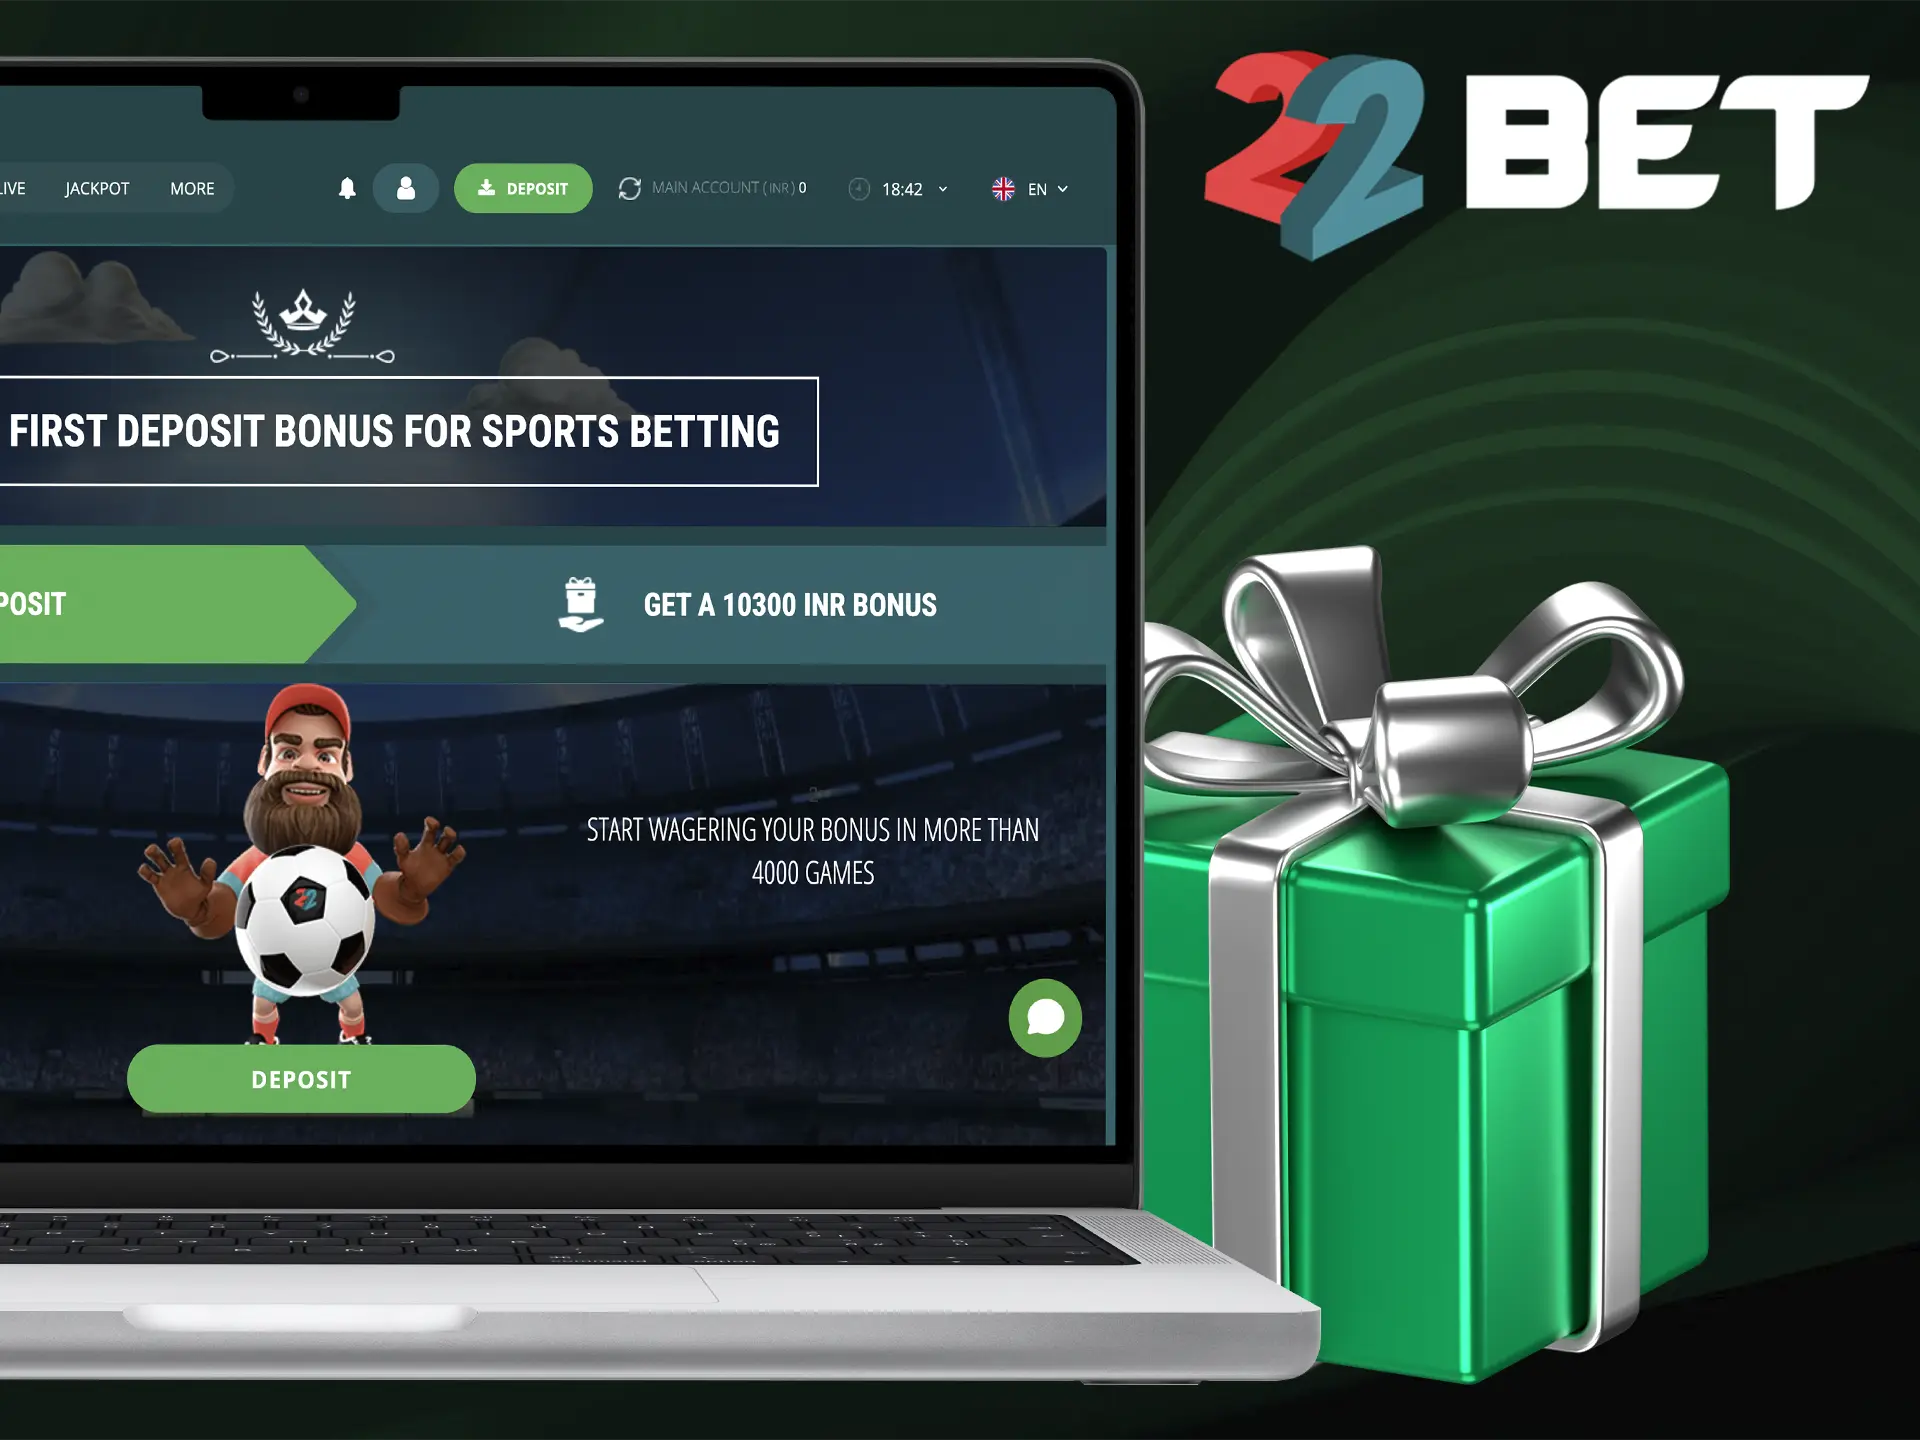 Make your first deposit to get a bonus from 22Bet that will increase your cricket bet.